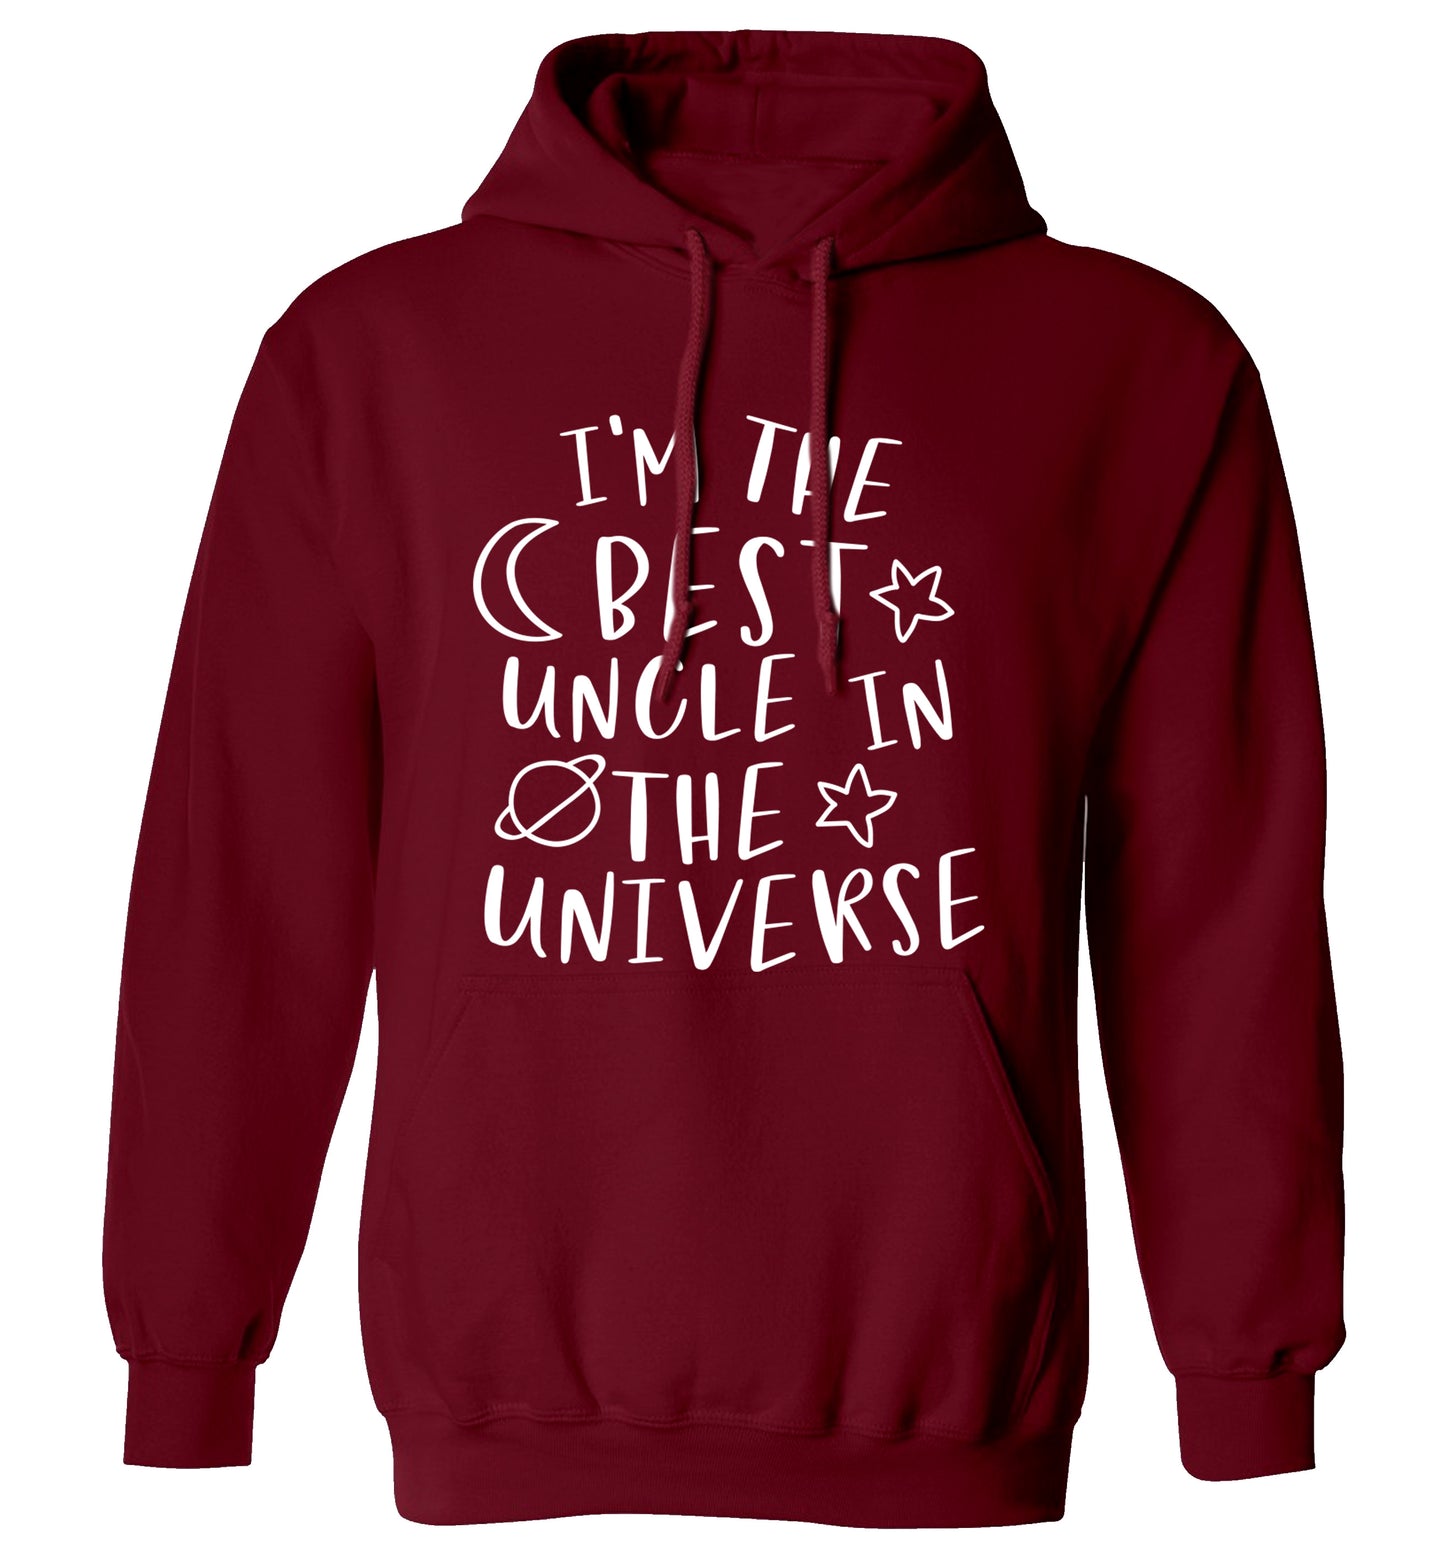 I'm the best uncle in the universe adults unisex maroon hoodie 2XL